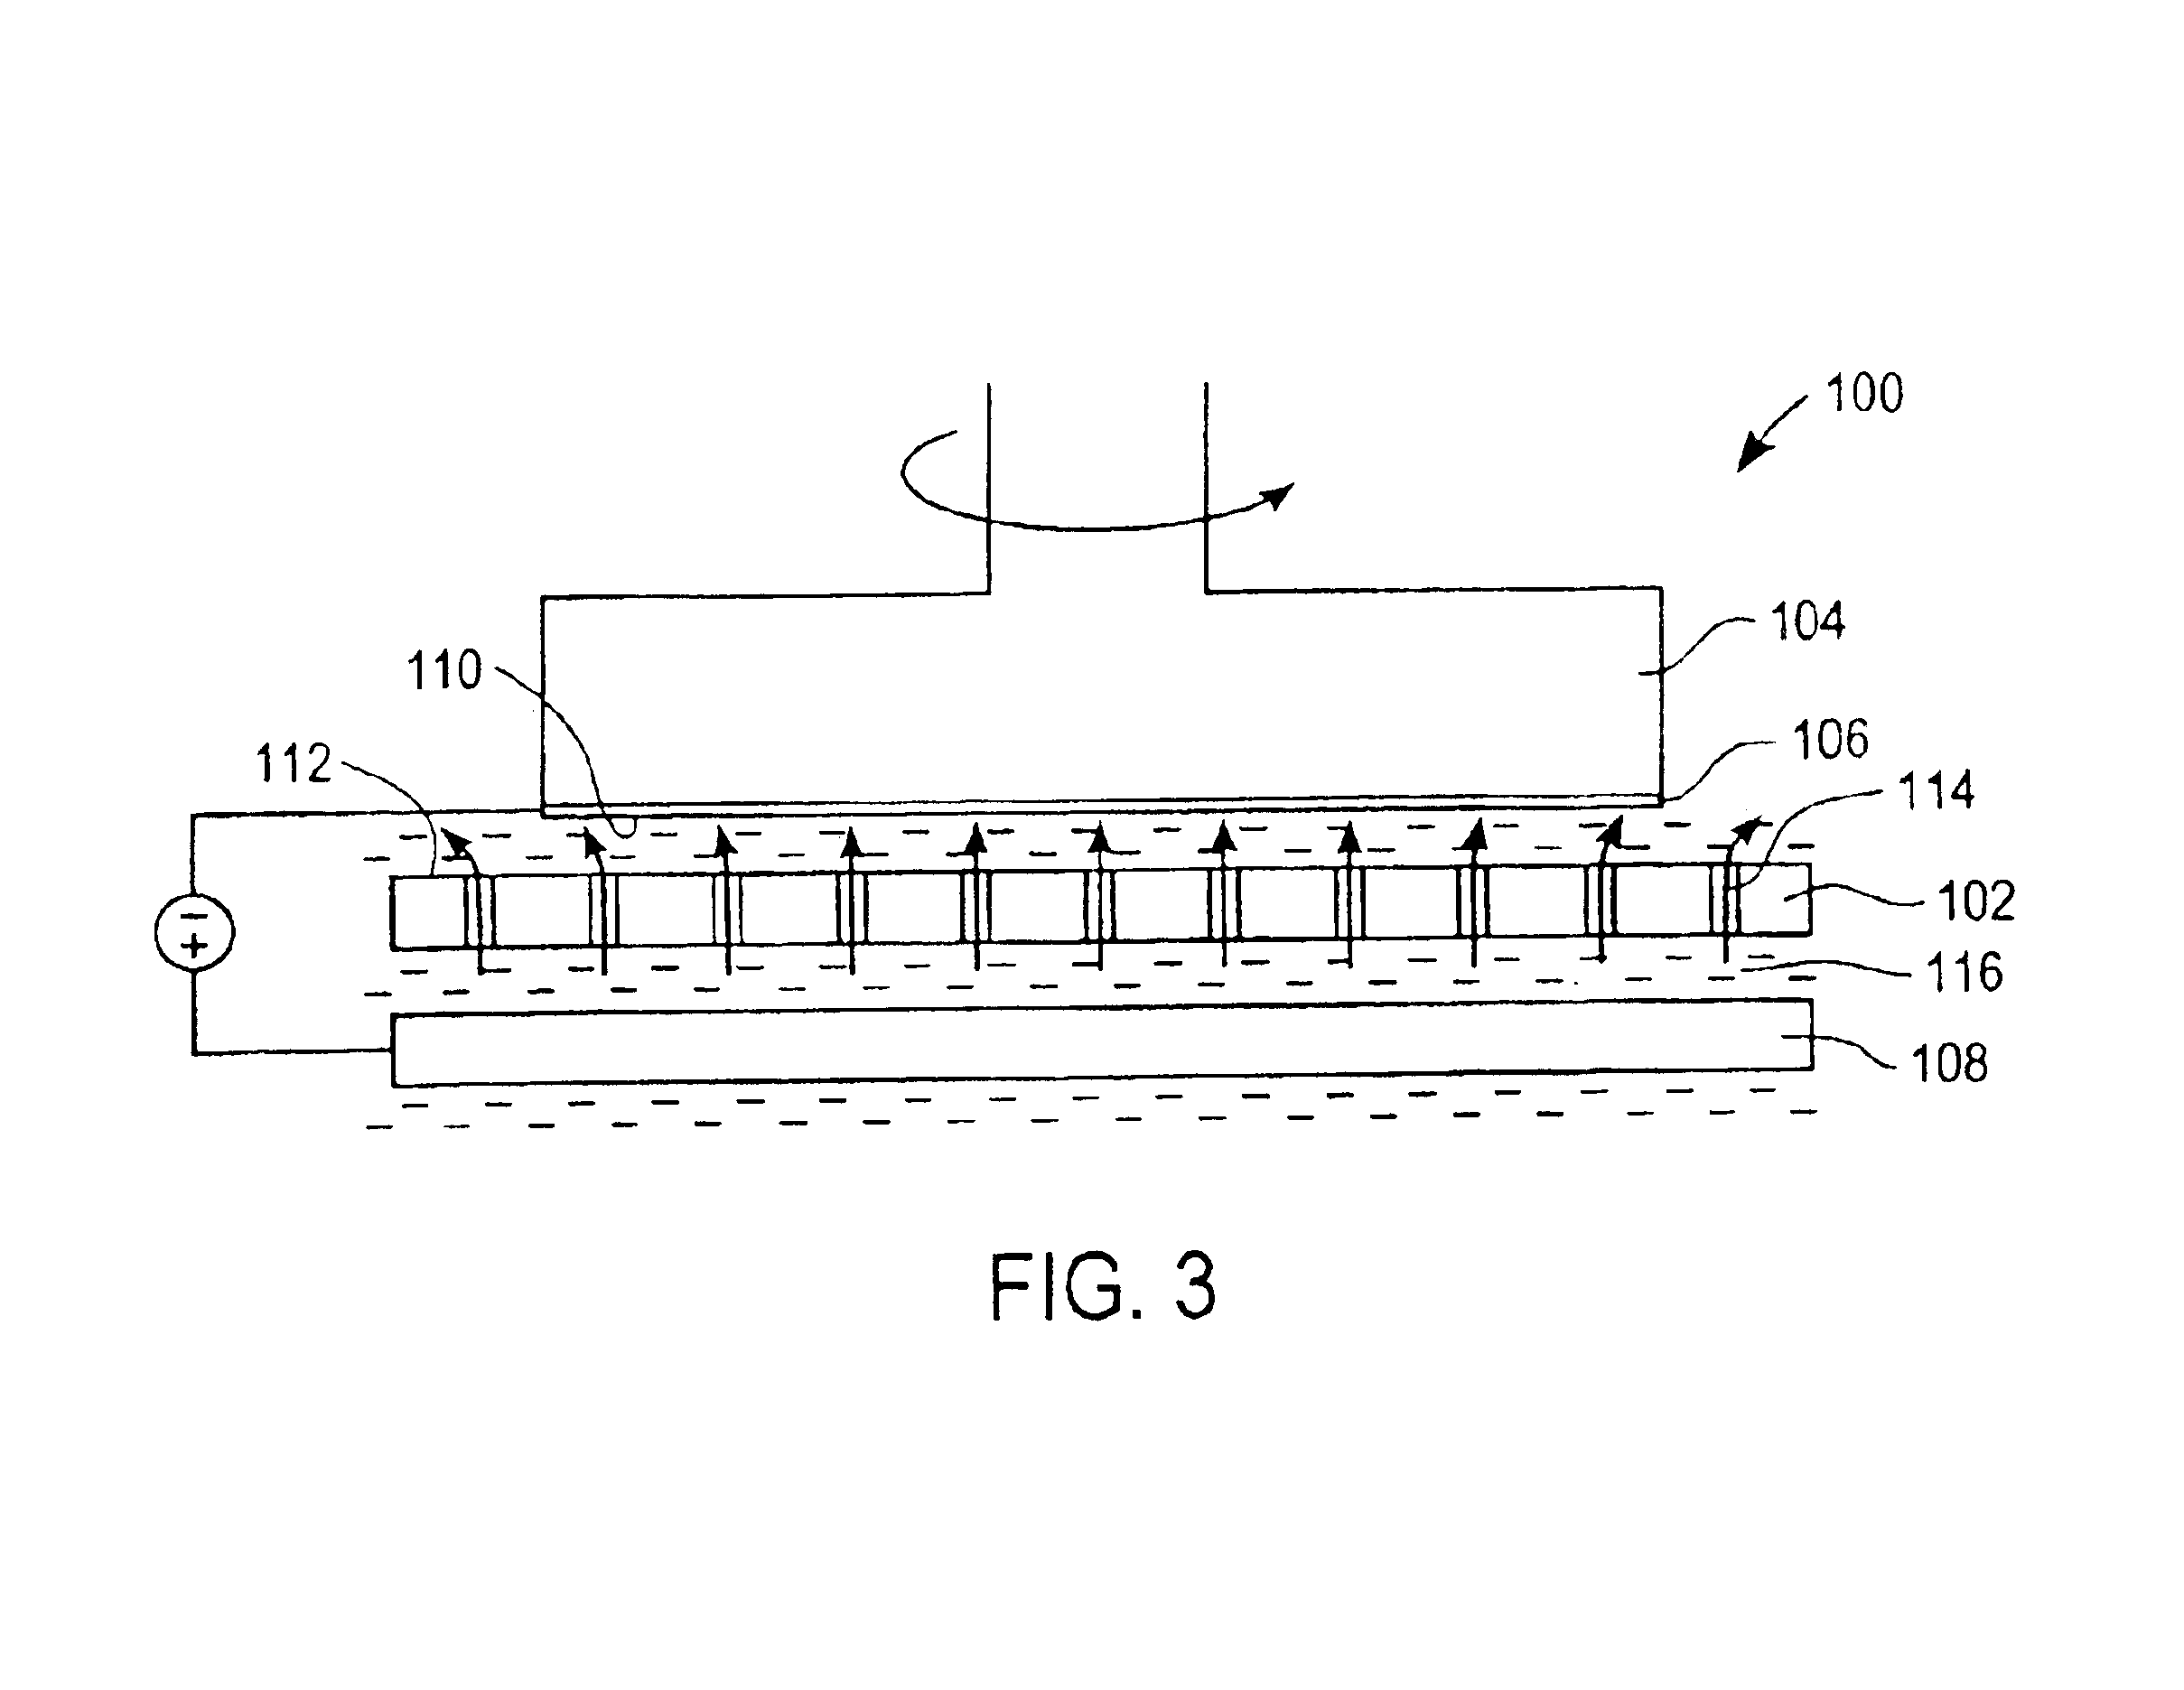 Method for electrochemically processing a workpiece